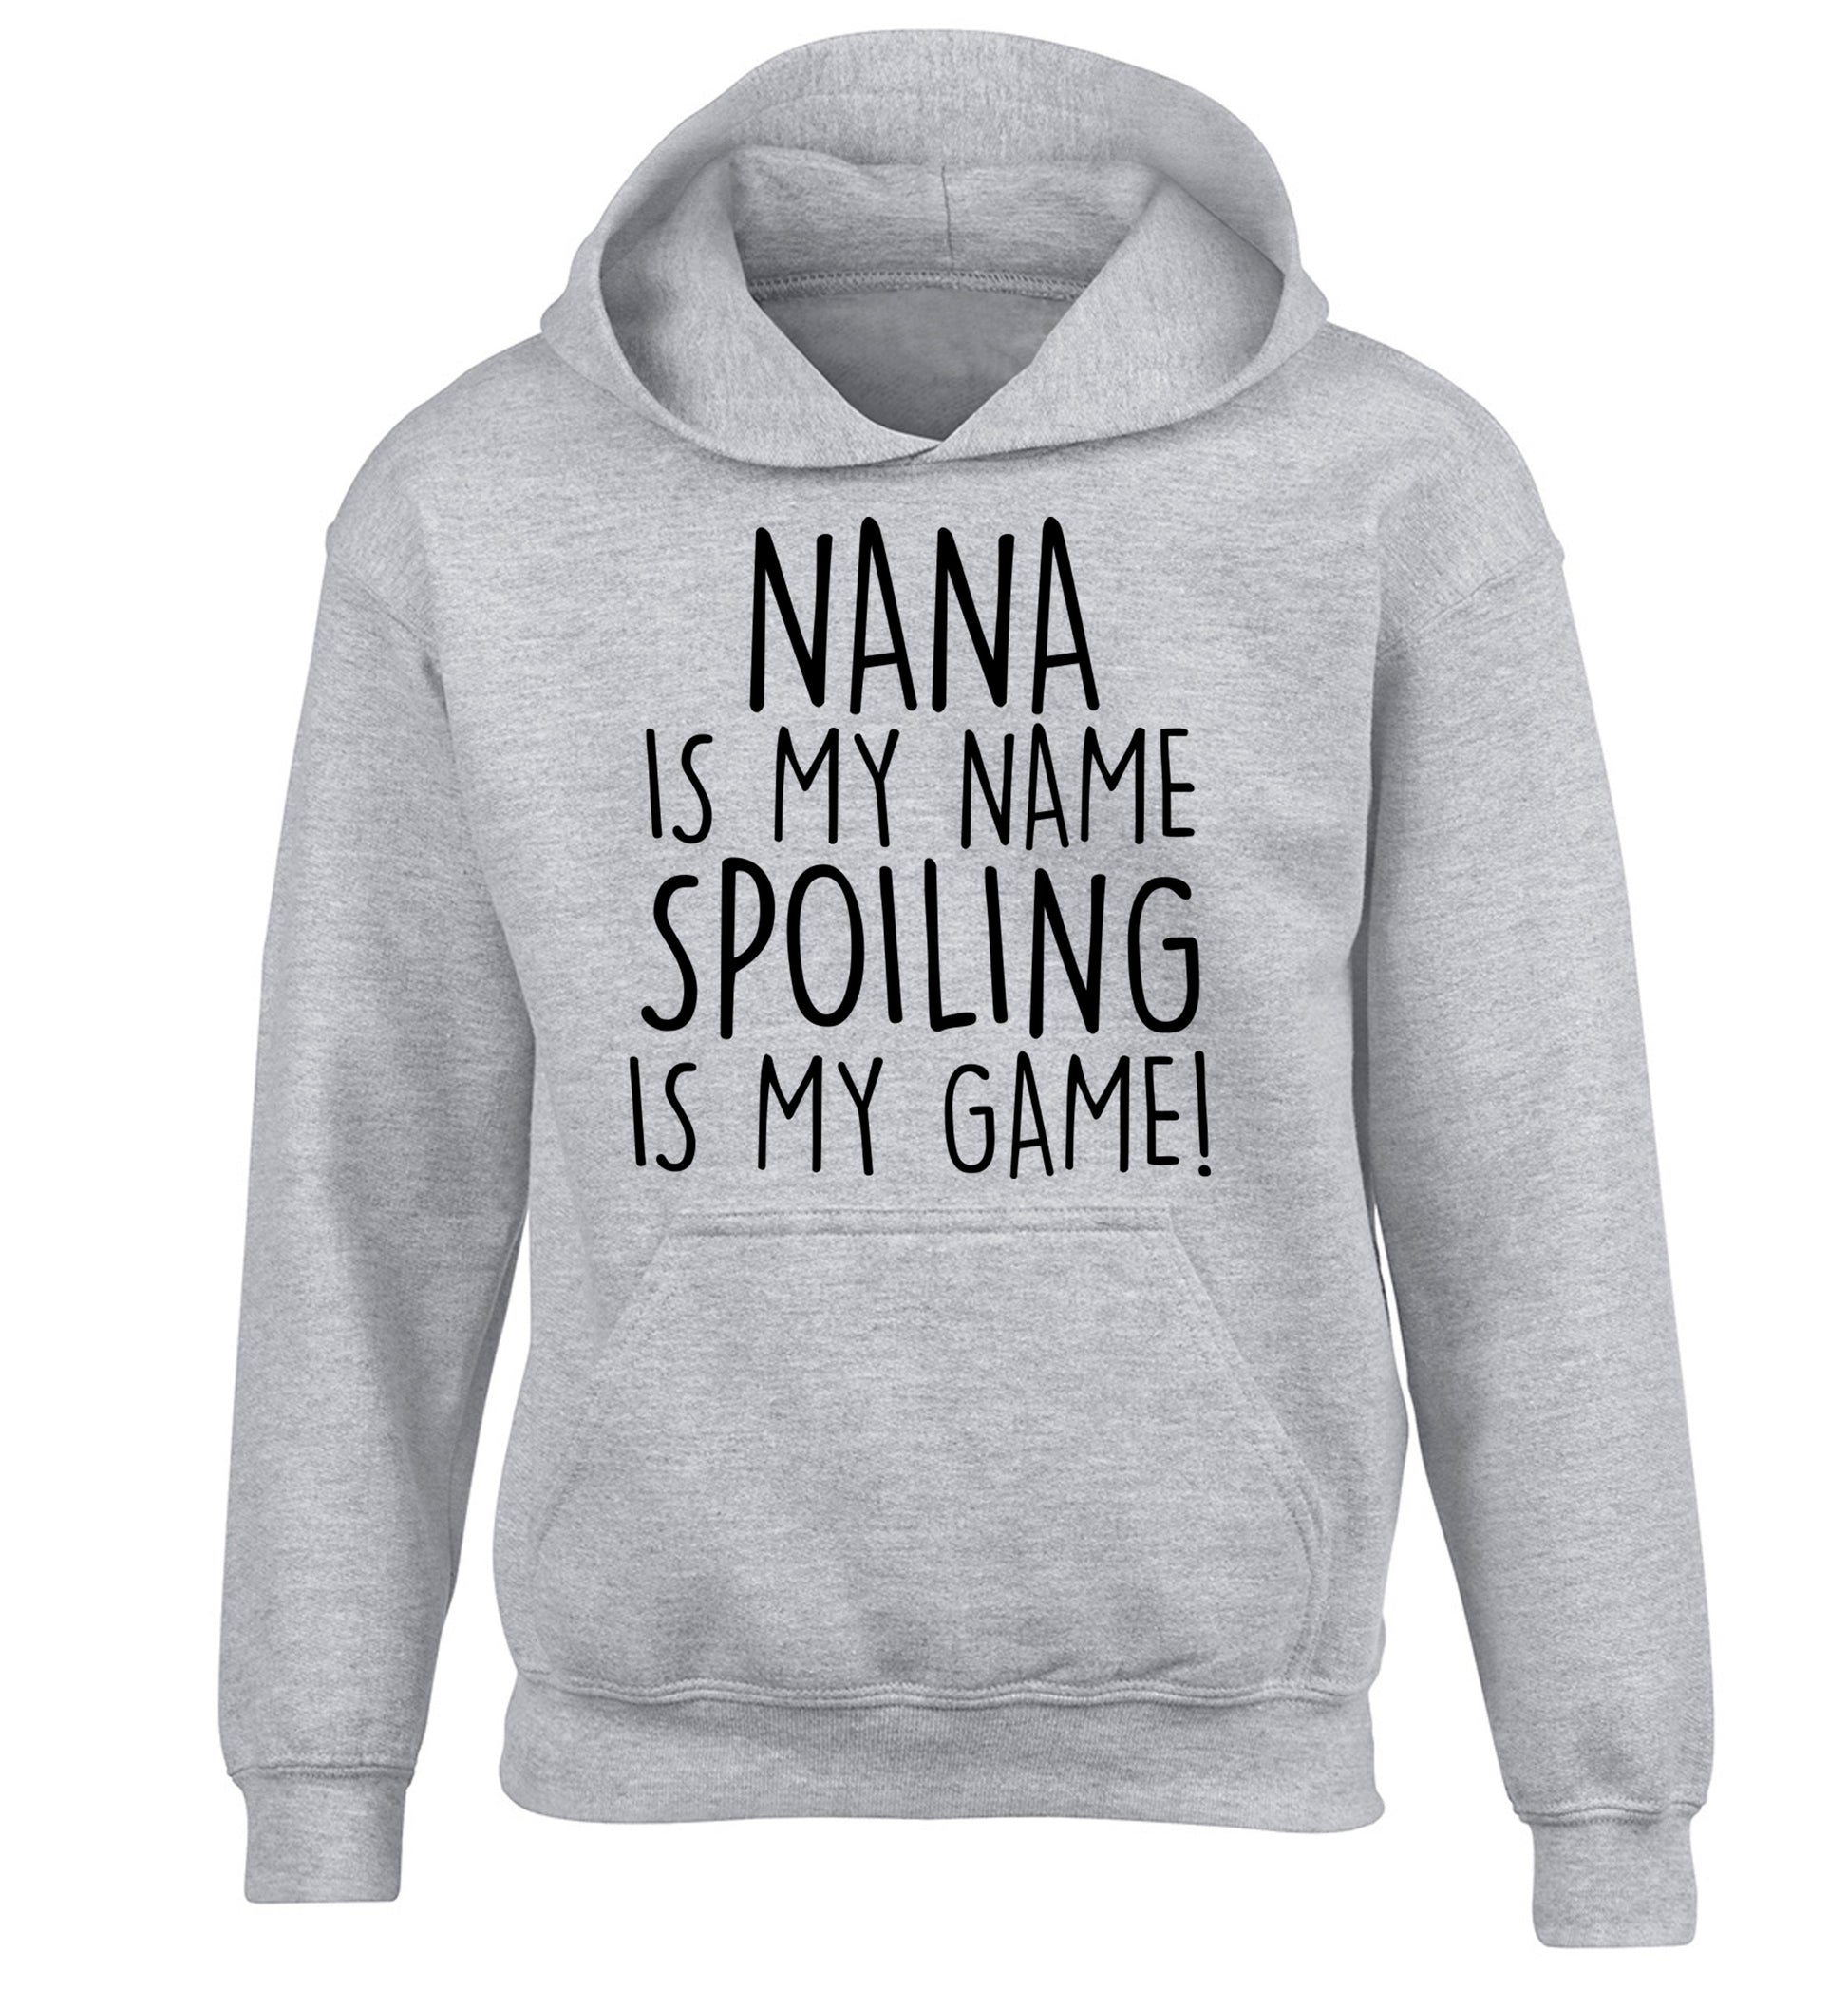 Nana is my name, spoiling is my game children's grey hoodie 12-14 Years